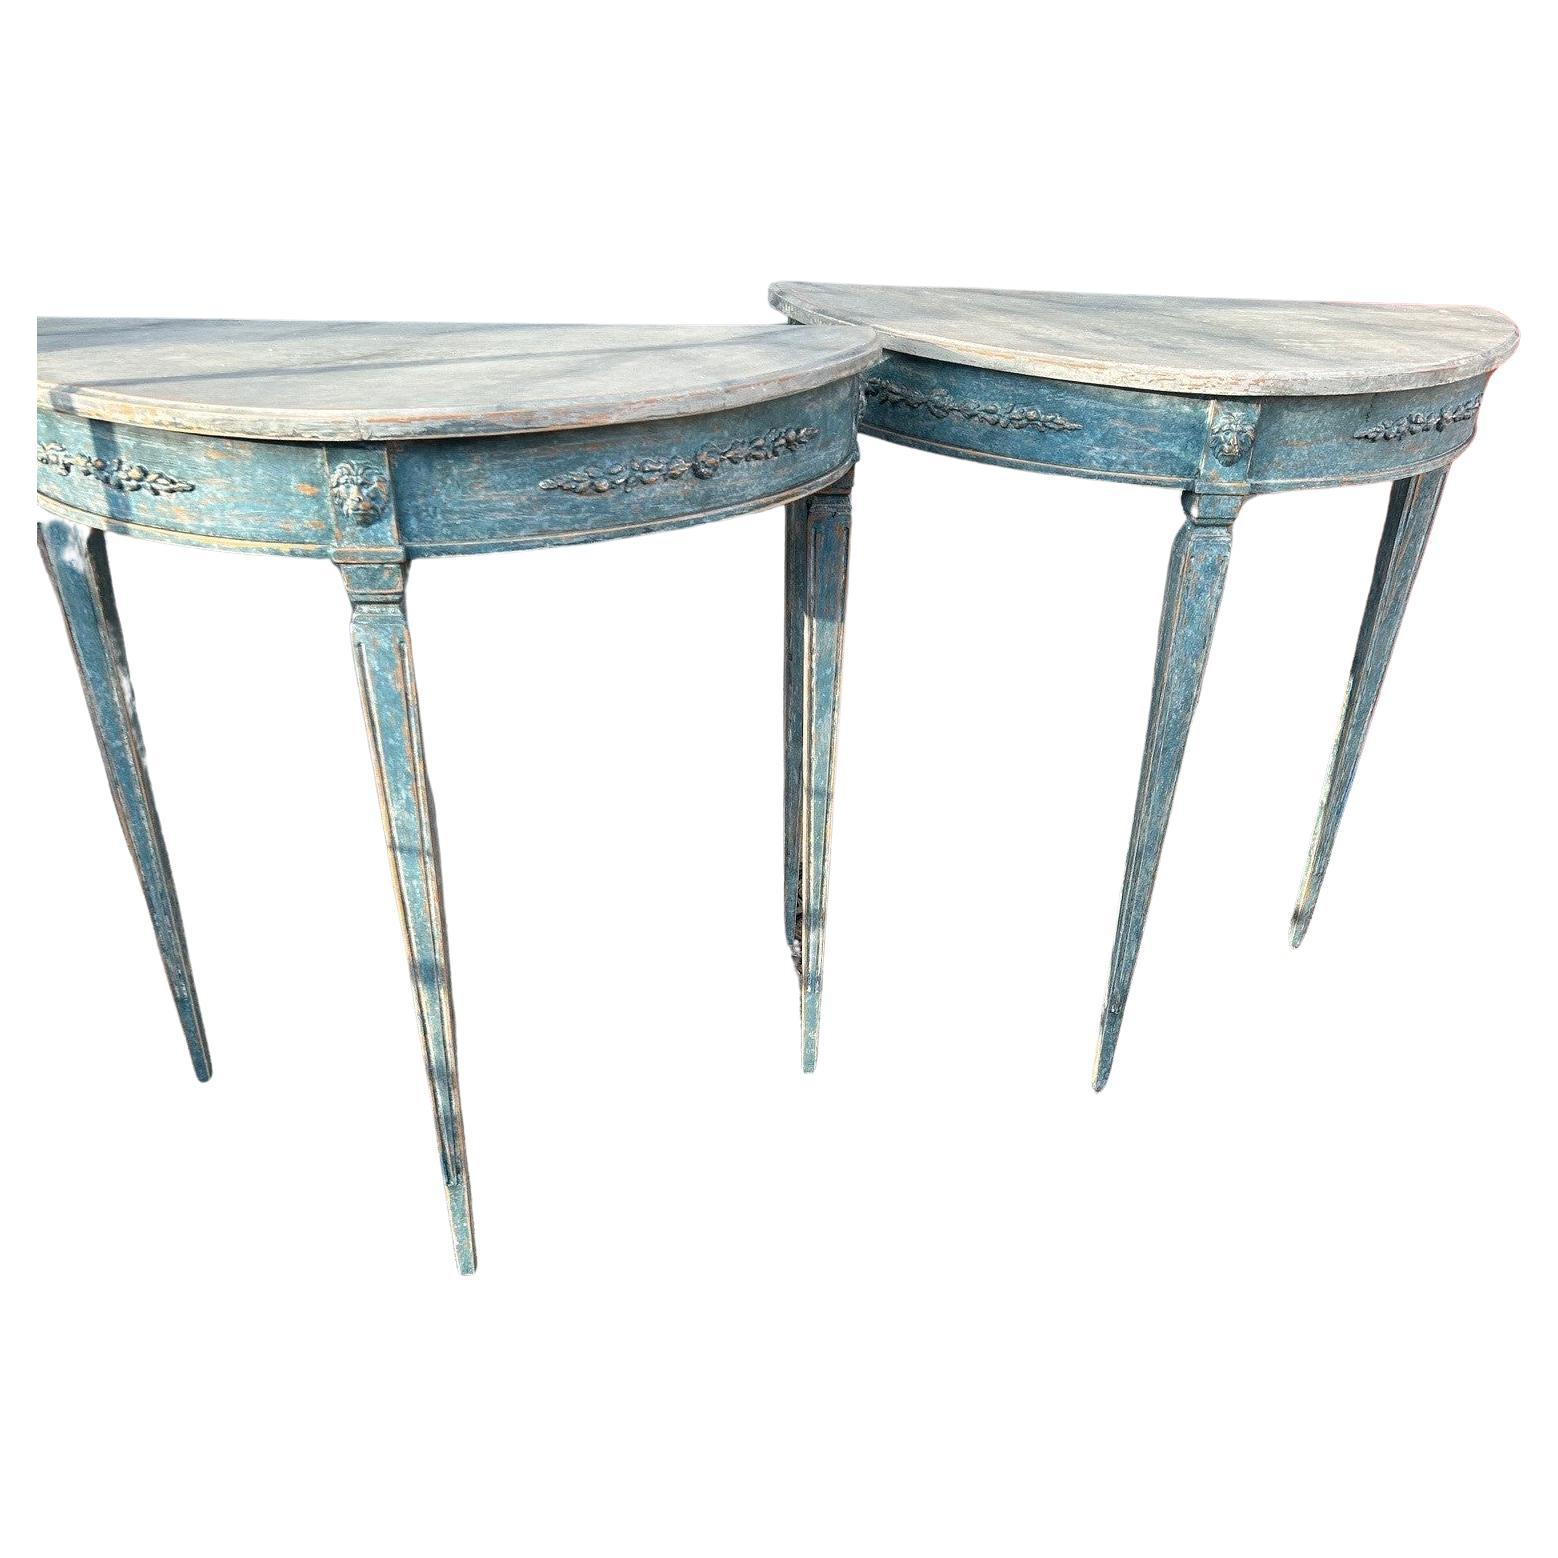 Pair of Demilune console tables in Gustavian style.

Gray marble painted tabletop with profiled edge.
Blue-painted base with curved apron. Tapered legs with fluting.

Sold as a pair.